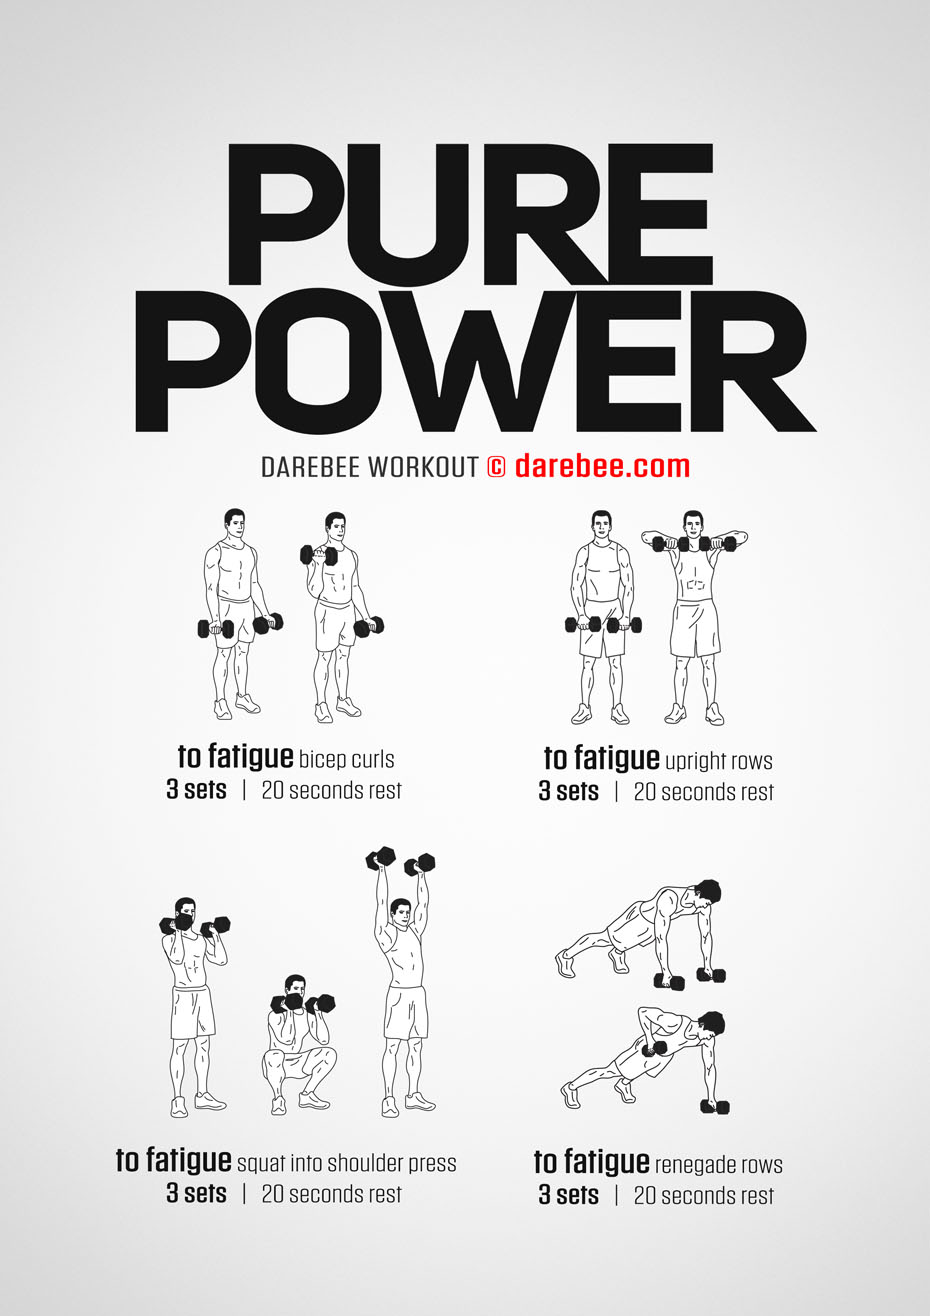 15 Minute Group Power Workout Routine for Weight Loss